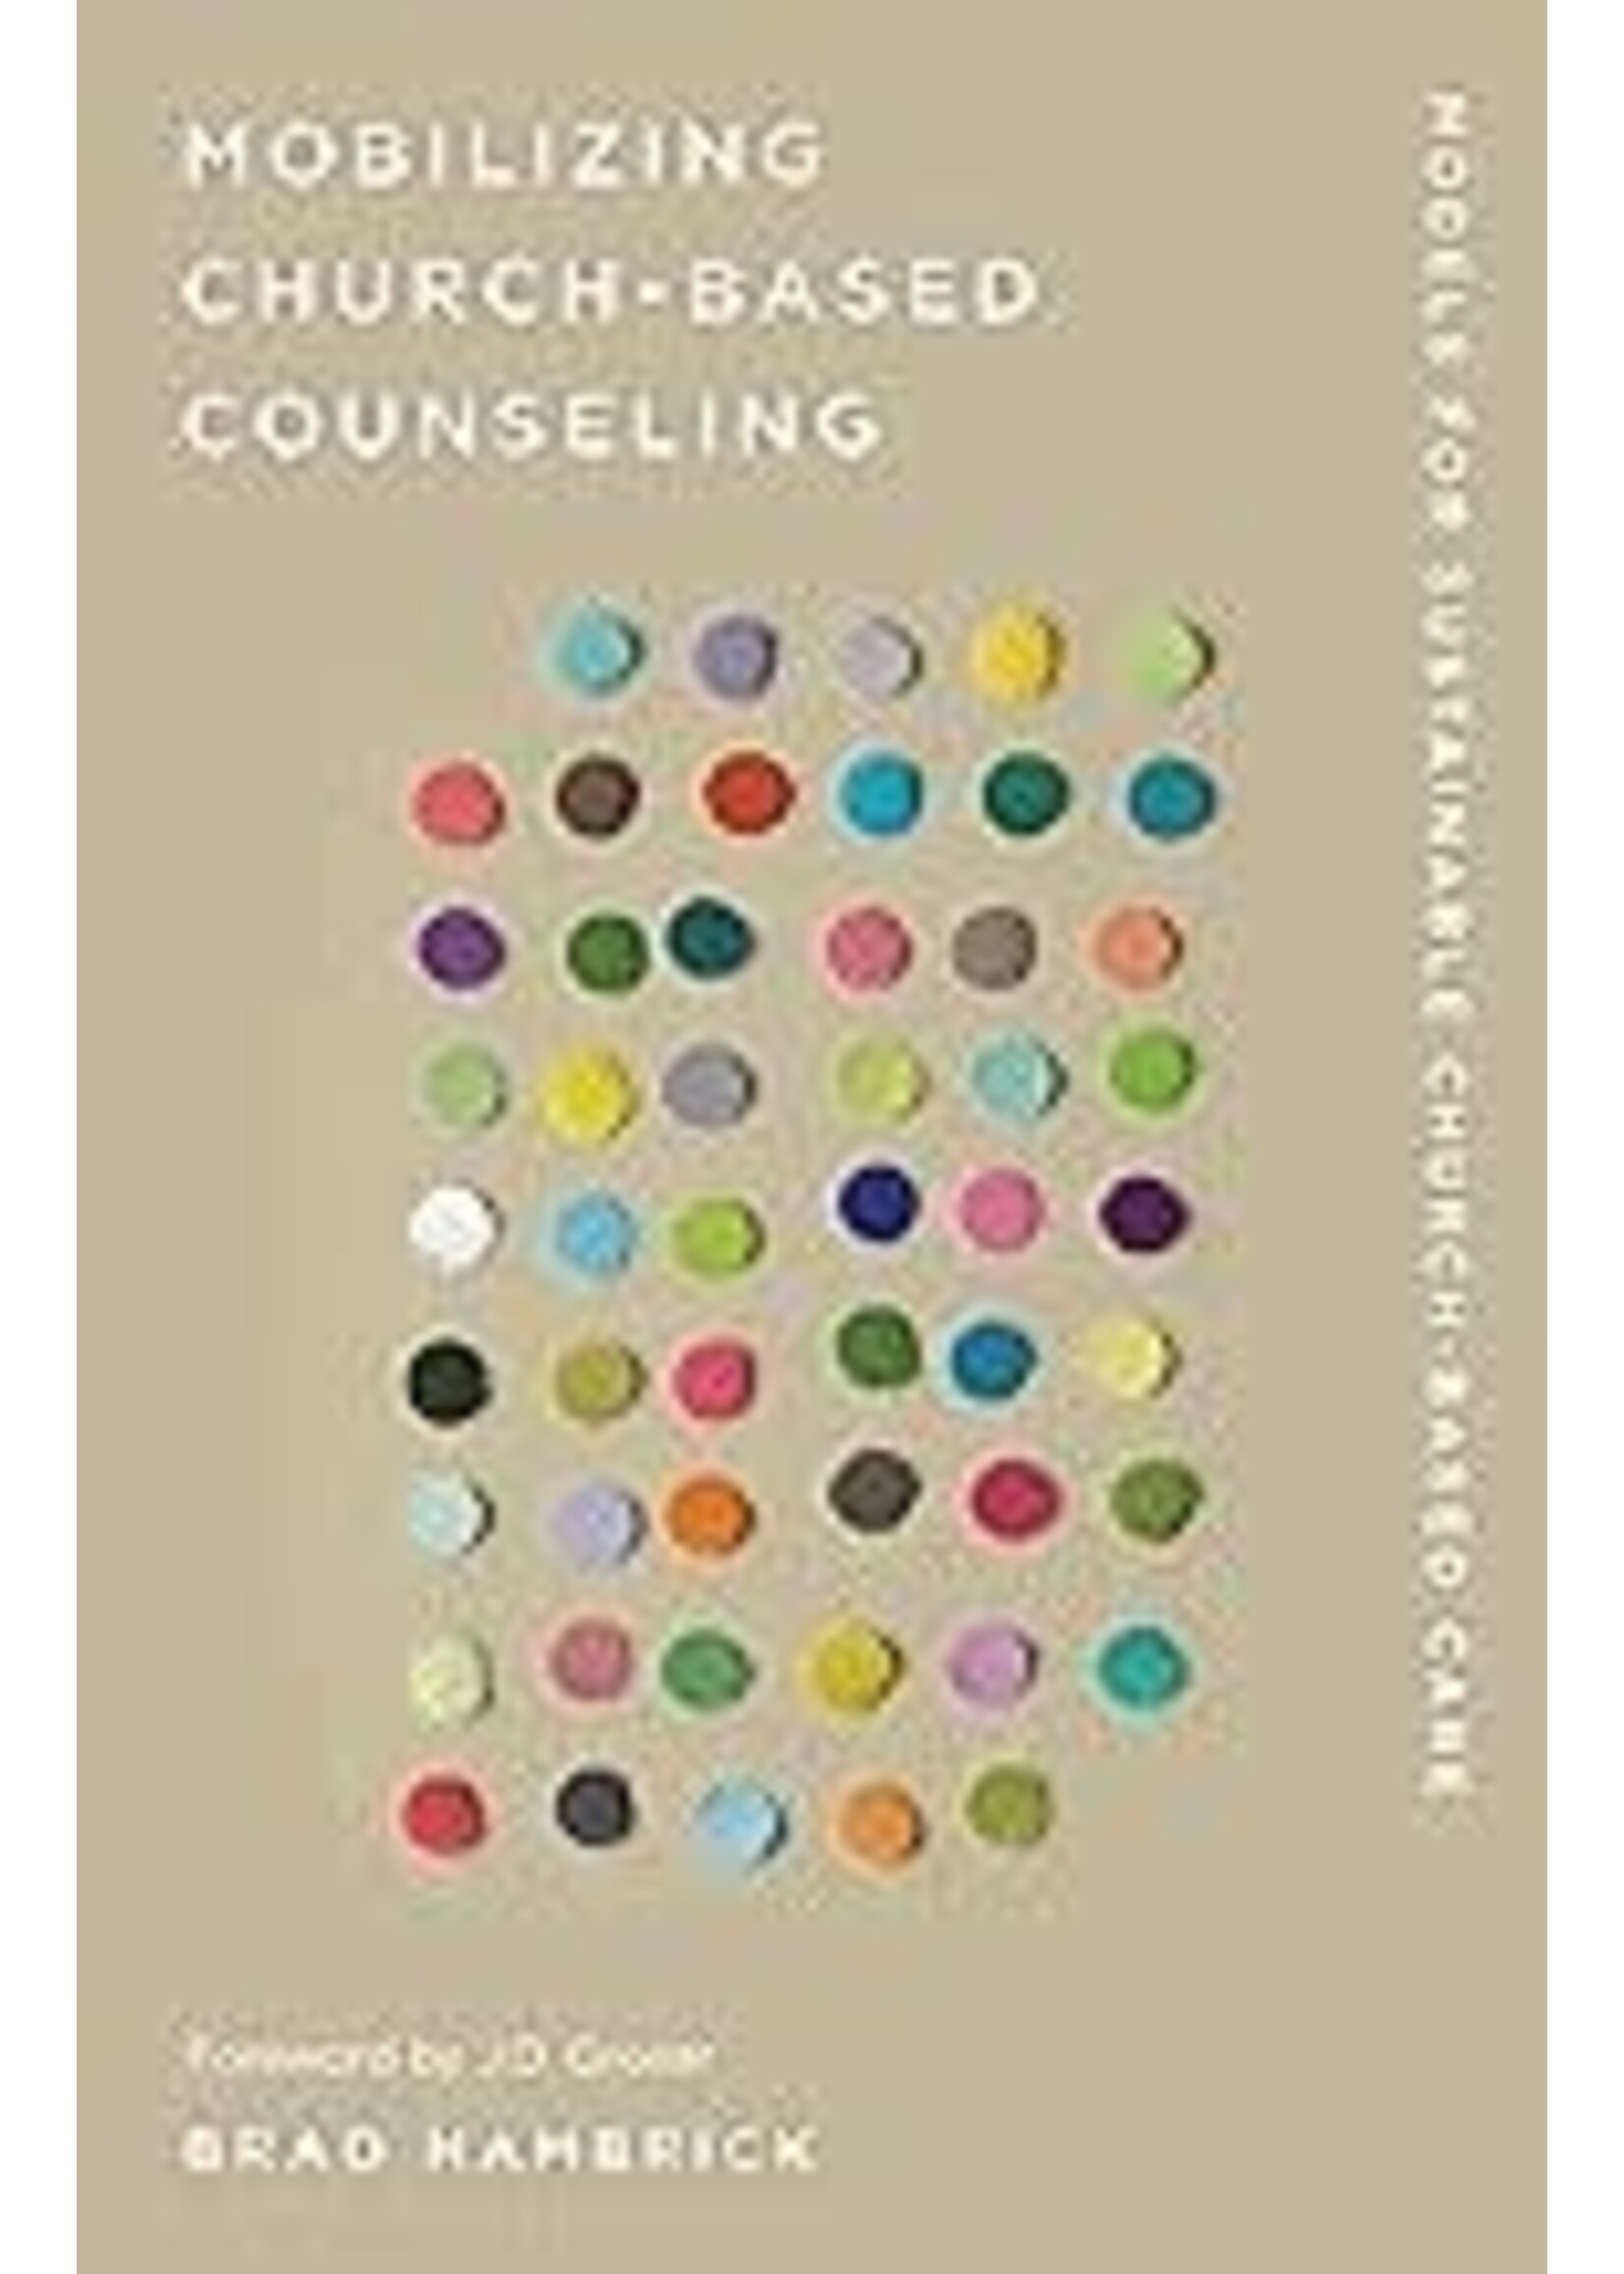 Mobilizing Church-Based Counseling (Church-Based Counseling)